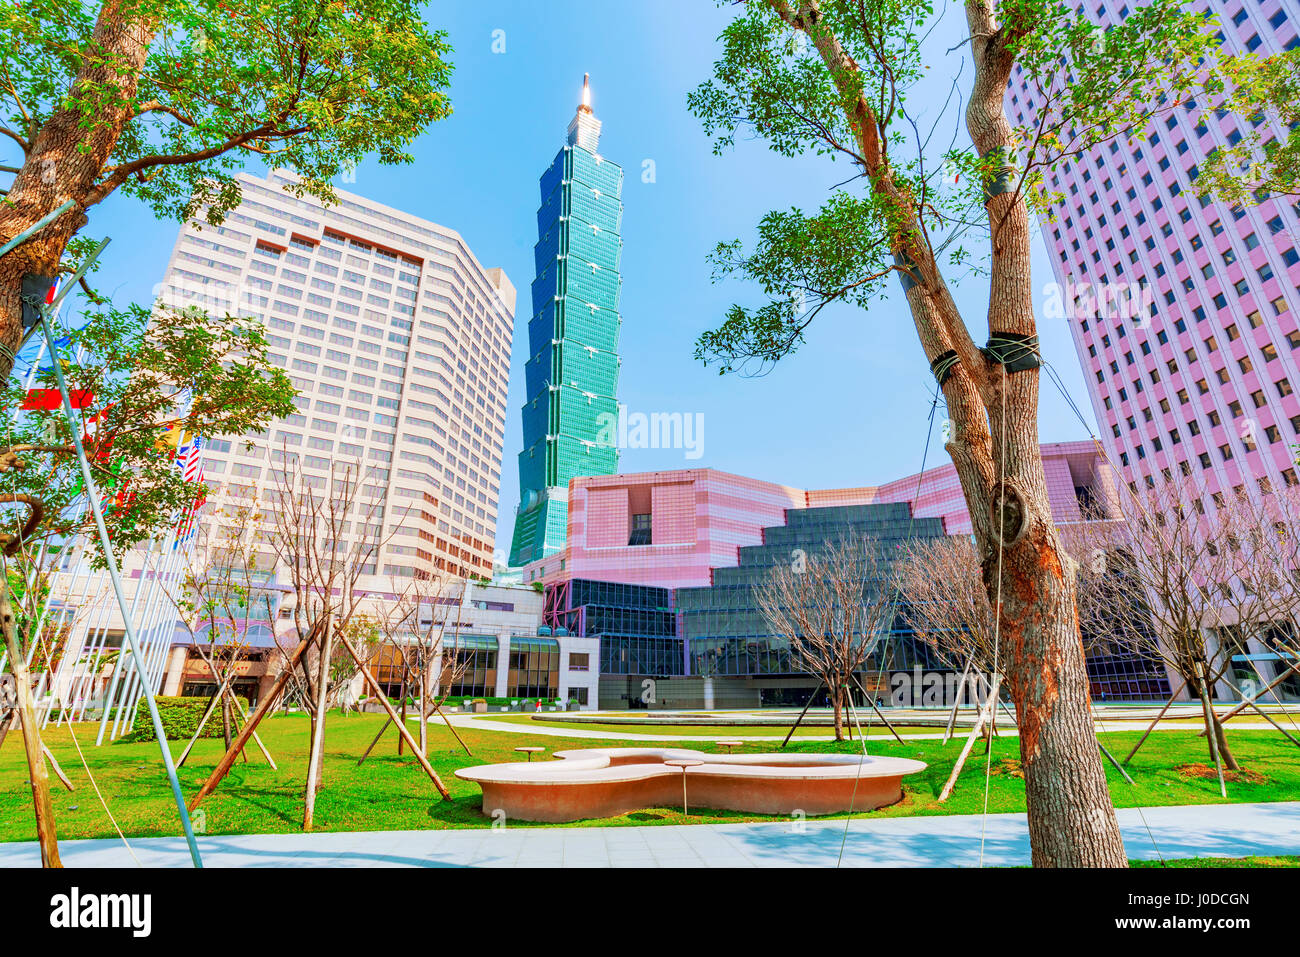 TAIPEI, TAIWAN - MARCH 28: This is a view of the World Trade Center building and Taipei 101 in the Xinyi financial district on March 28, 2017 in Taipe Stock Photo